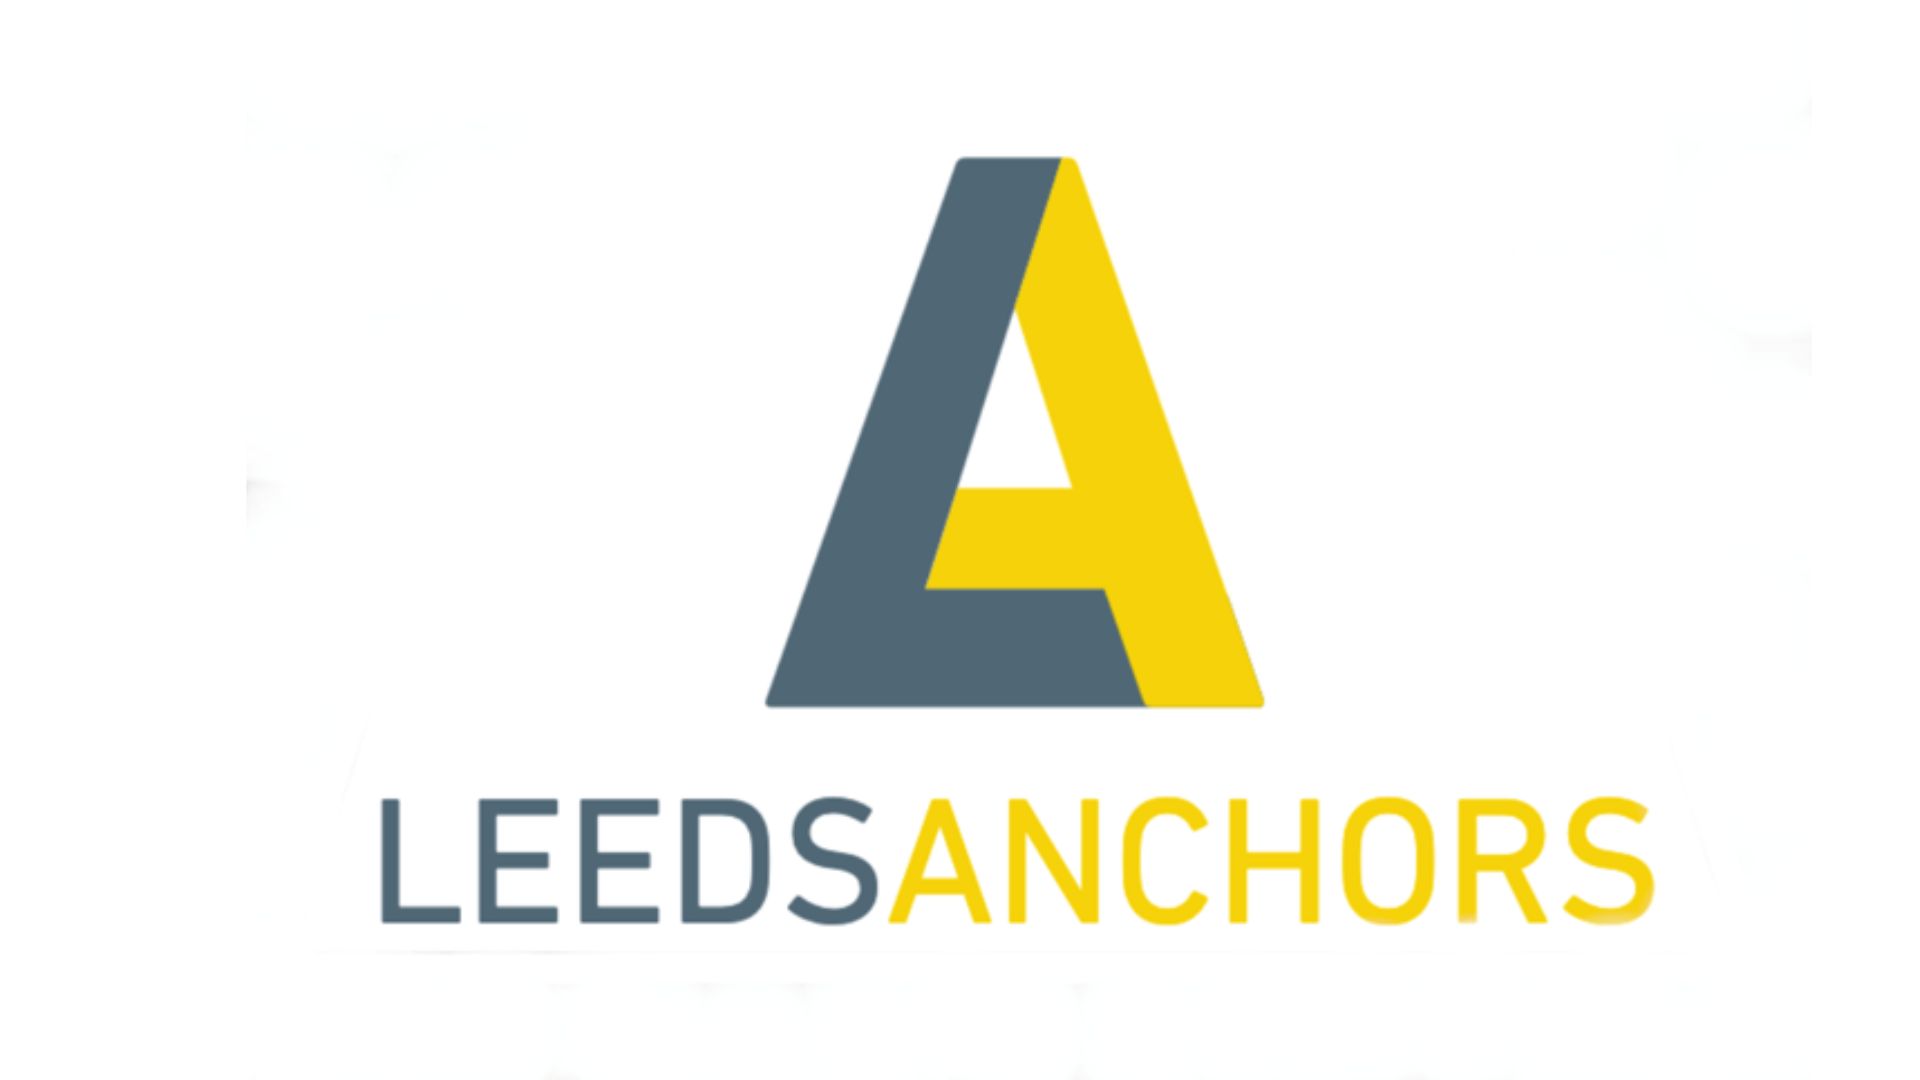 The Leeds Anchors logo - yellow and grey with the L and A merging to form a triangle